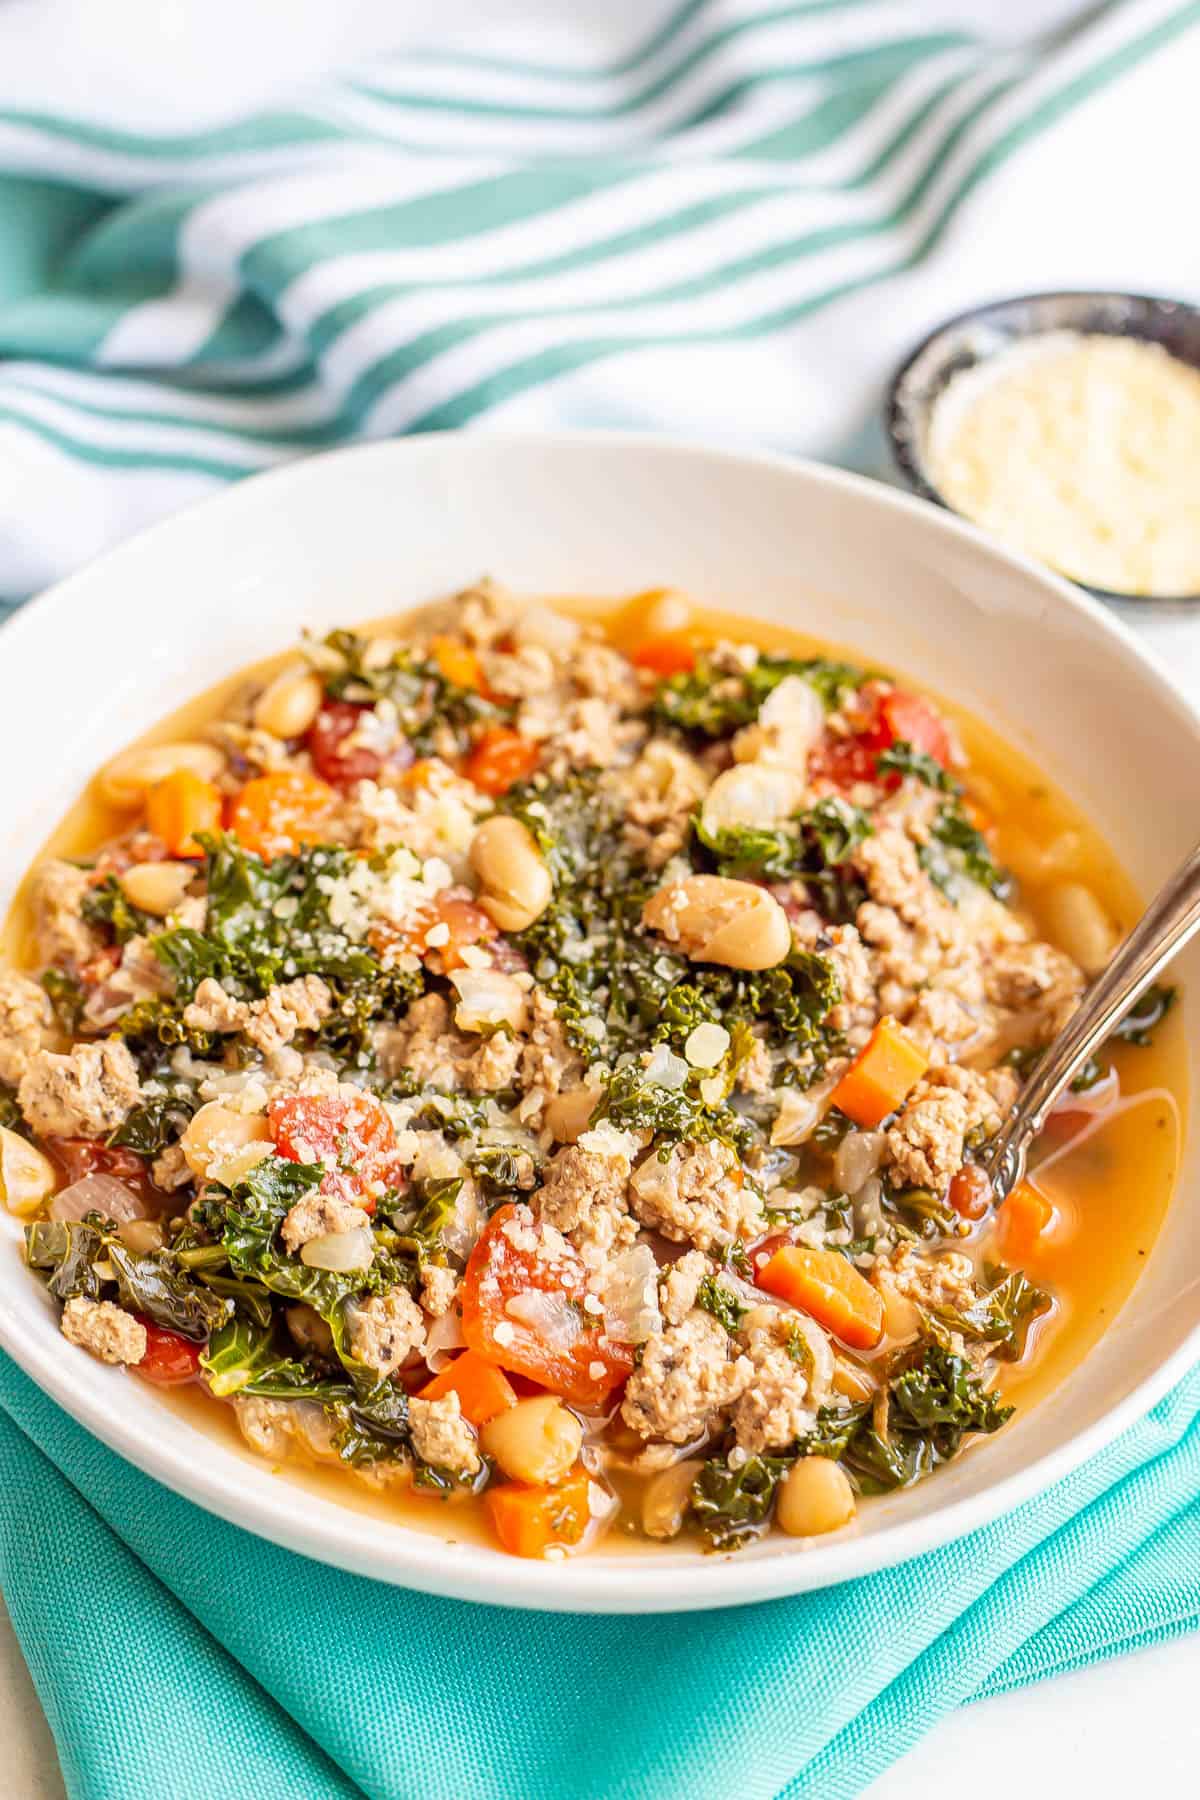 A spoon resting in a white bowl of soup with ground turkey, kale, carrots, tomatoes and white beans.